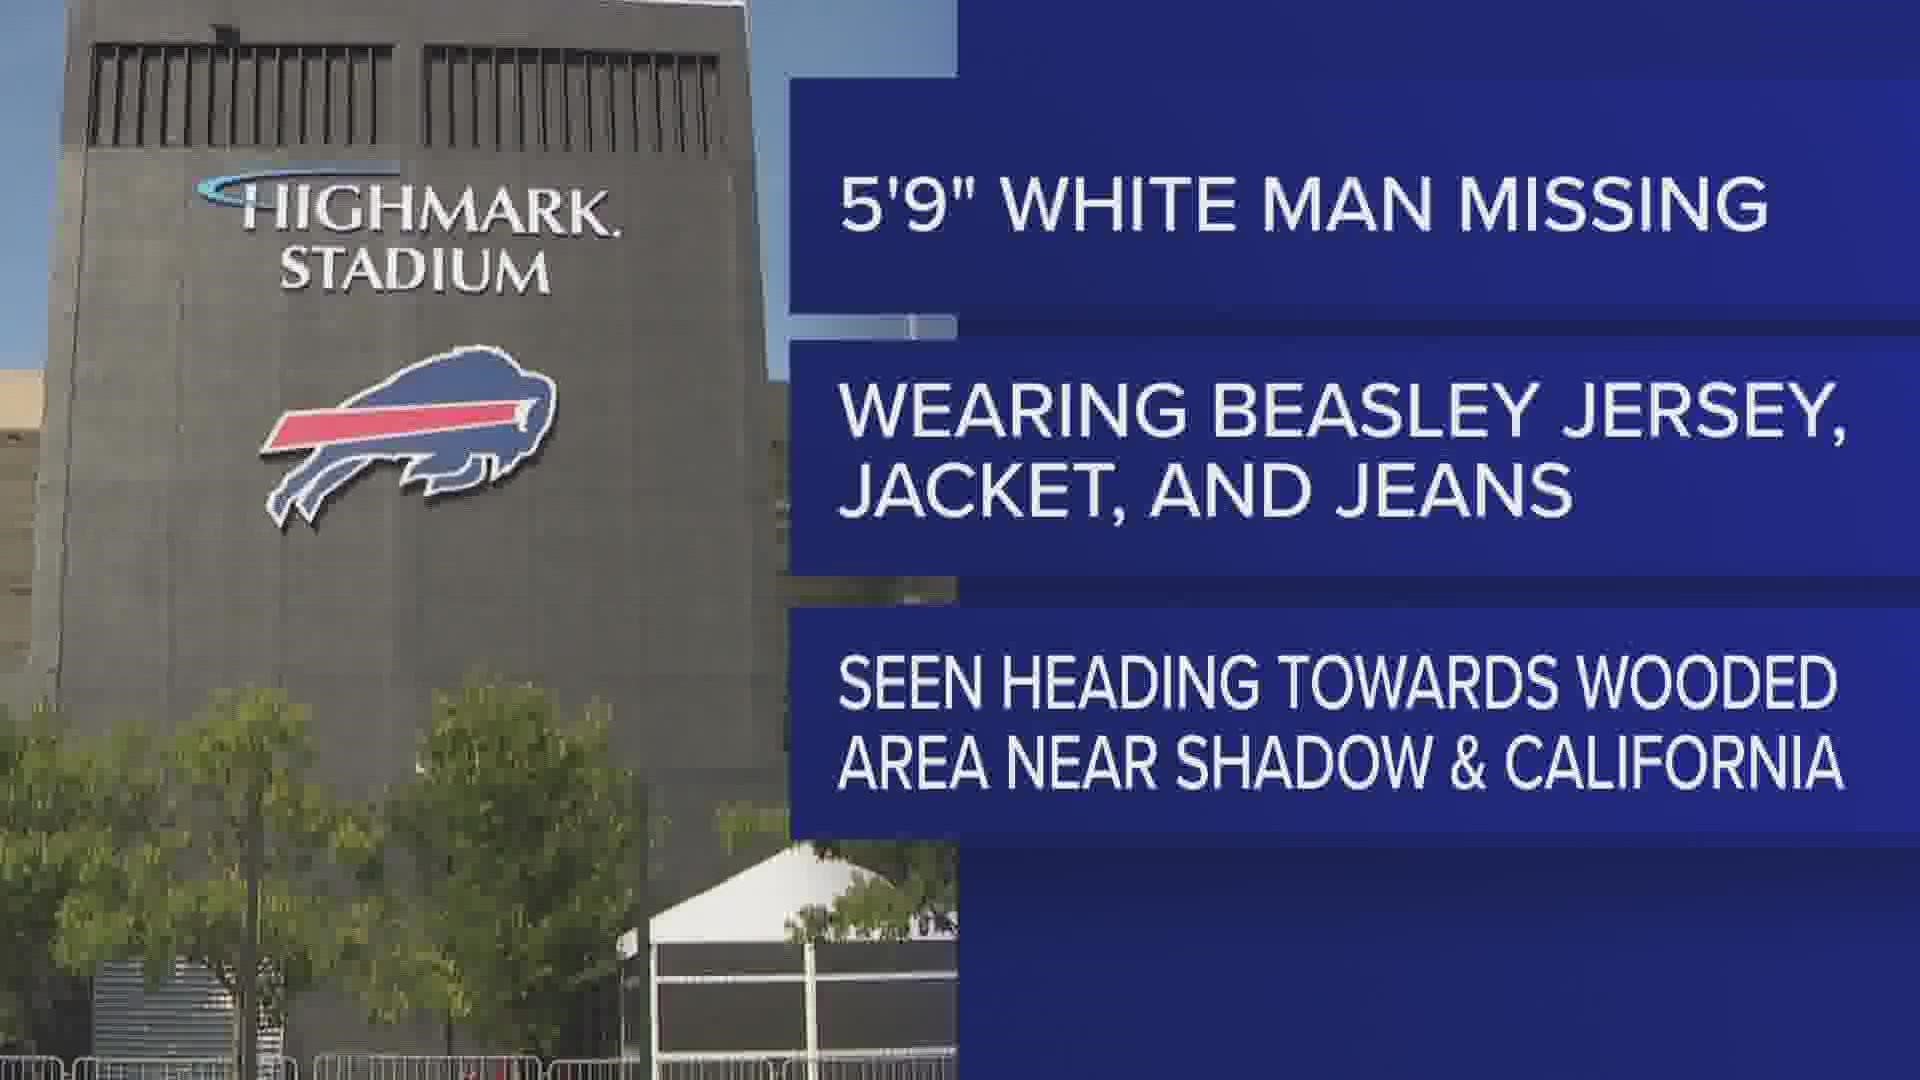 Orchard Park Police are asking for help finding a missing Bills fan, a 5'9" male wearing a Beasley jersey, jacket, and jeans.